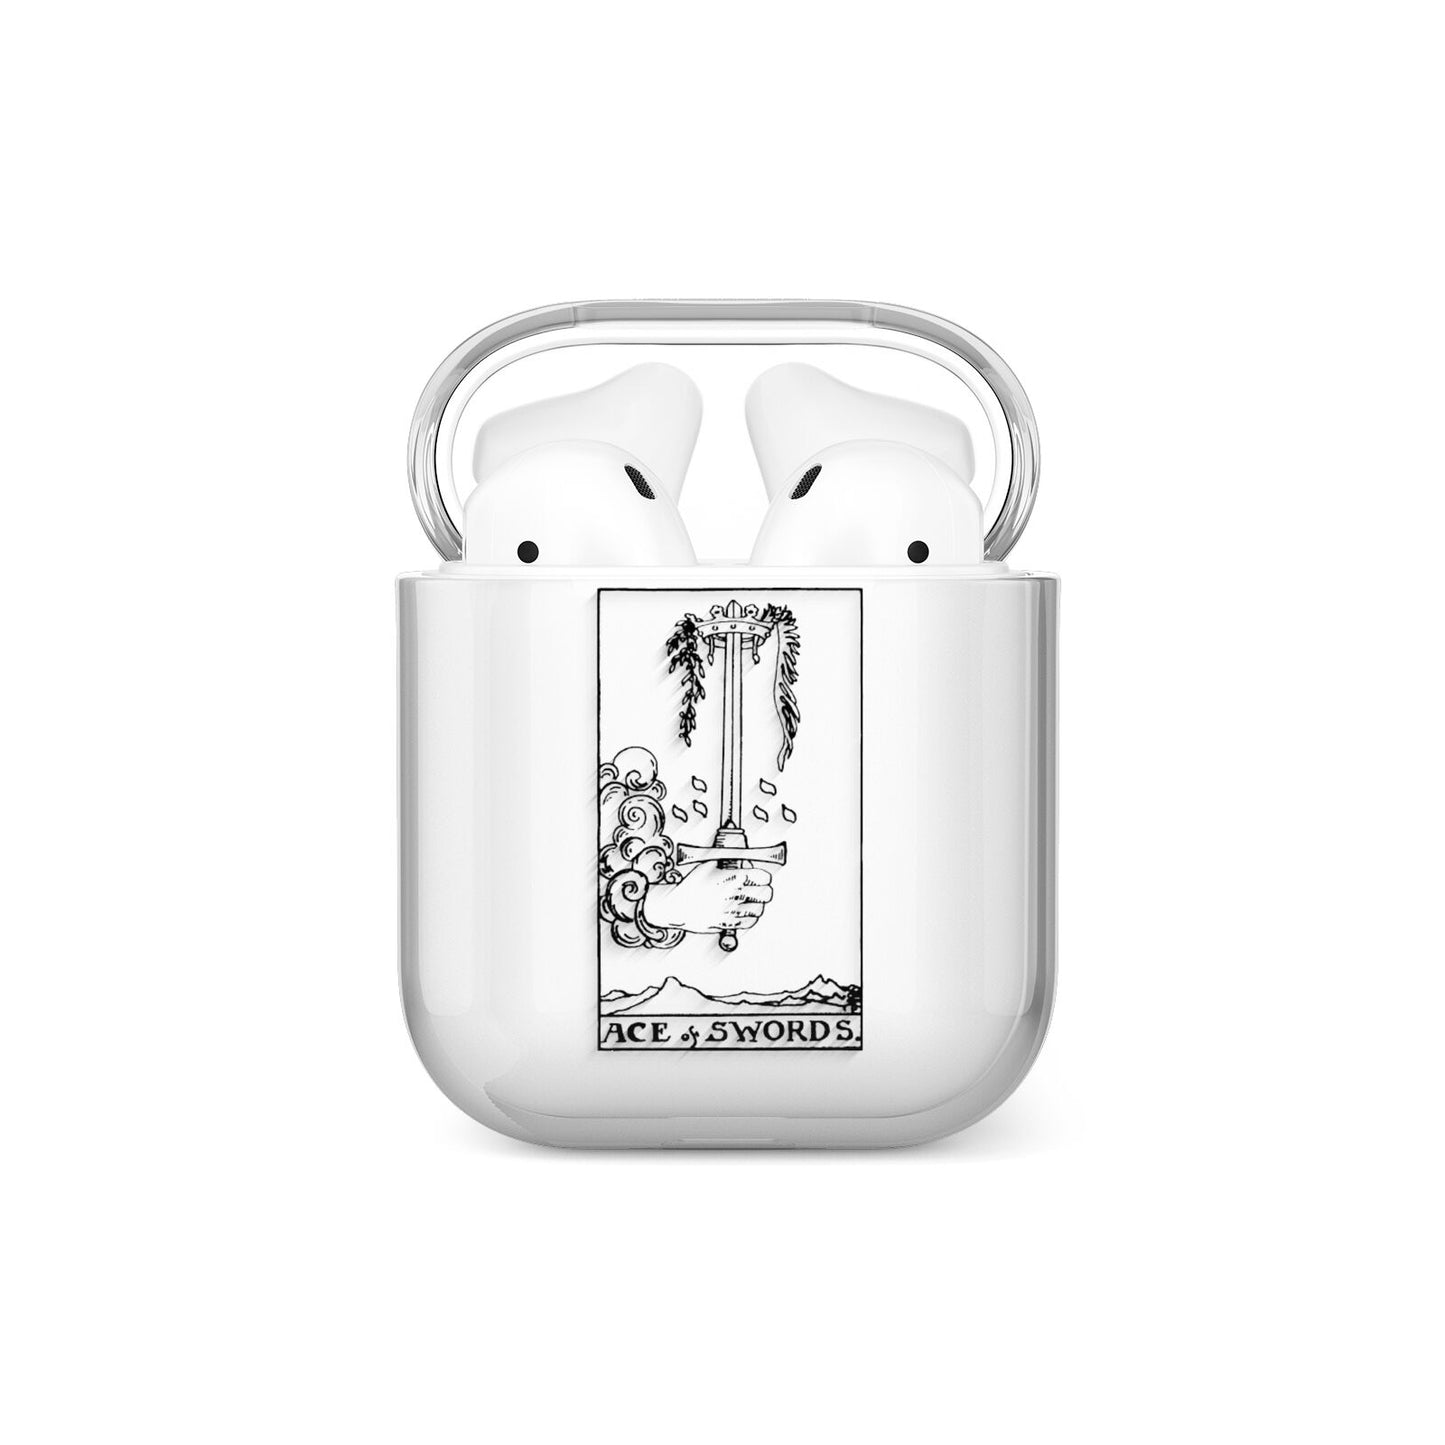 Ace of Swords Monochrome AirPods Case